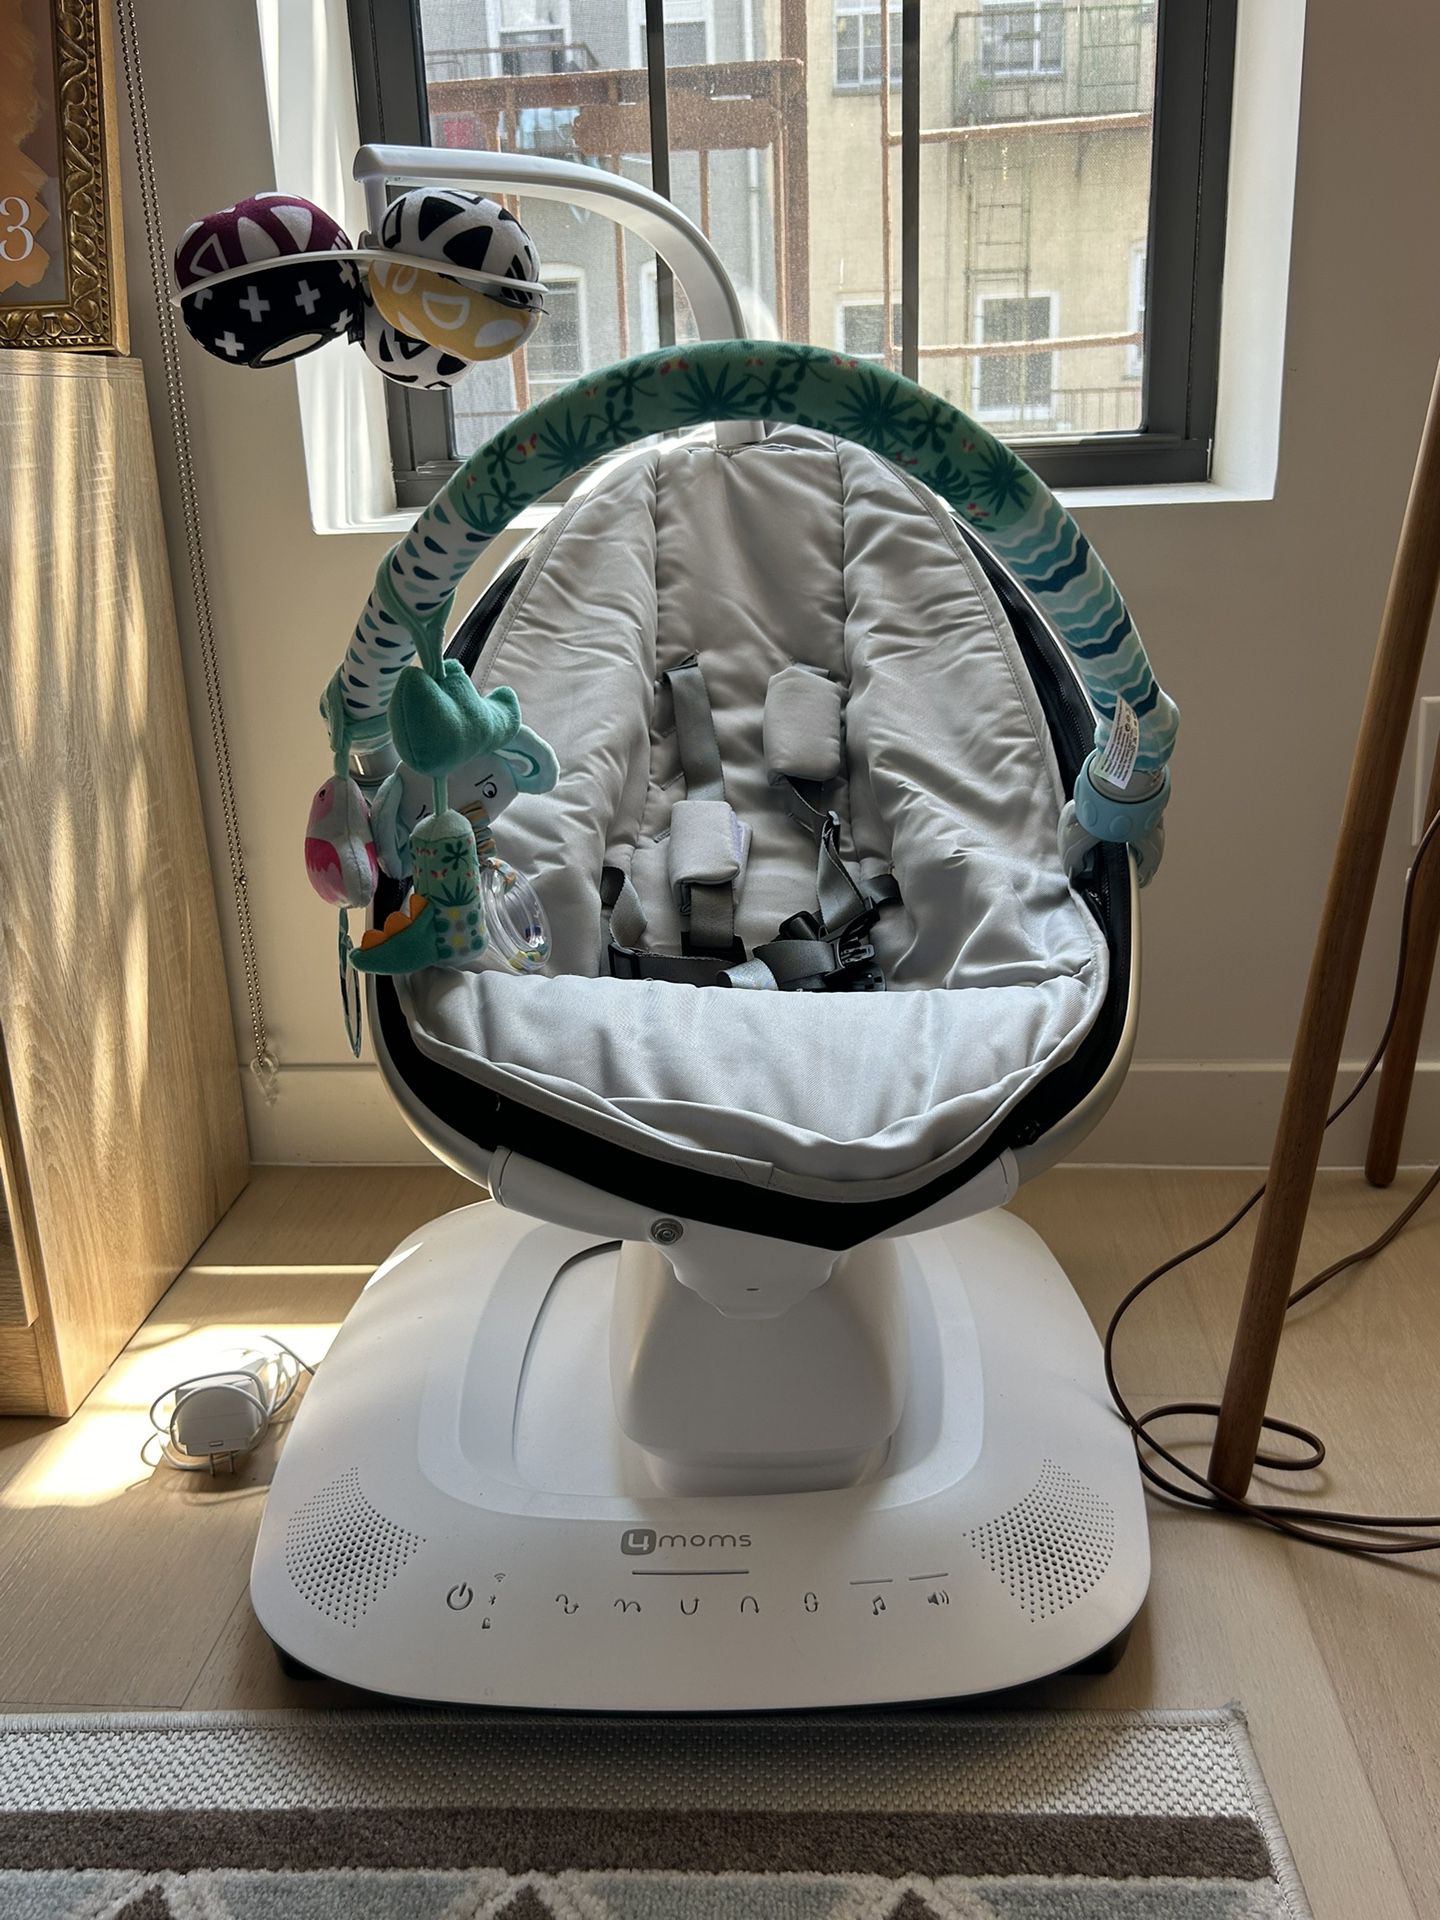 4moms MamaRoo Multi-Motion Baby Swing, Bluetooth Enabled with 5 Unique Motions, Grey 